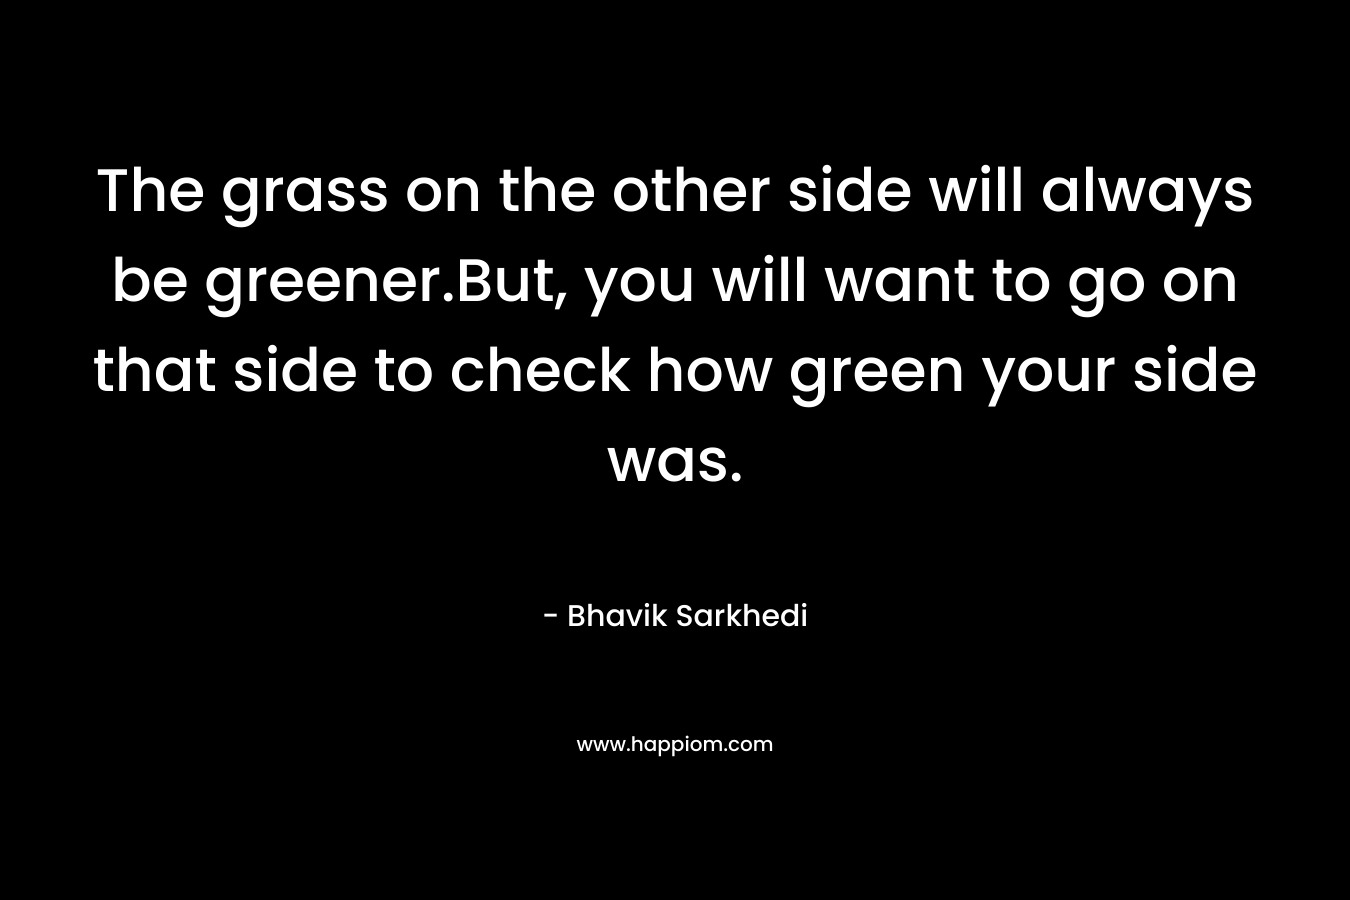 The grass on the other side will always be greener.But, you will want to go on that side to check how green your side was.